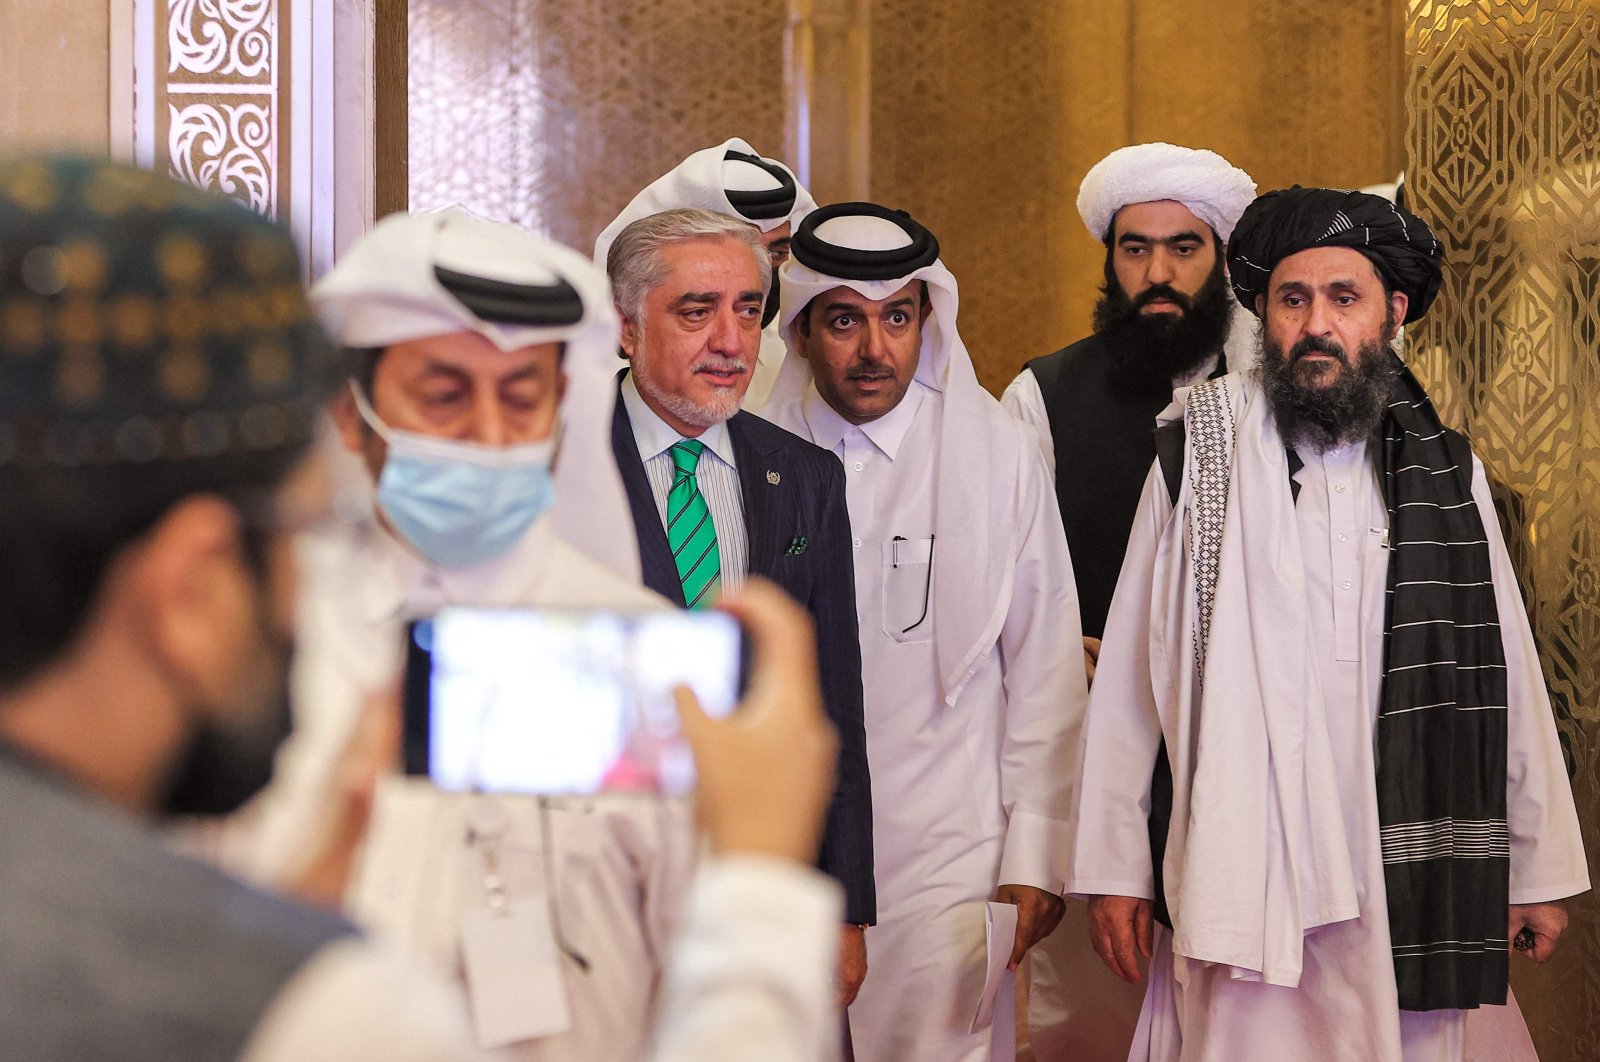 A man uses his phone to take a picture of (L to R) the head of Afghanistan's High Council for National Reconciliation Abdullah Abdullah, Qatar's envoy on counter-terrorism Mutlaq al-Qahtani, and the leader of the Taliban negotiating team Mullah Abdul Ghani Baradar as they arrive to present the final declaration of the peace talks between the Afghan government and the Taliban in Qatar's capital Doha on July 18, 2021. (AFP File Photo)